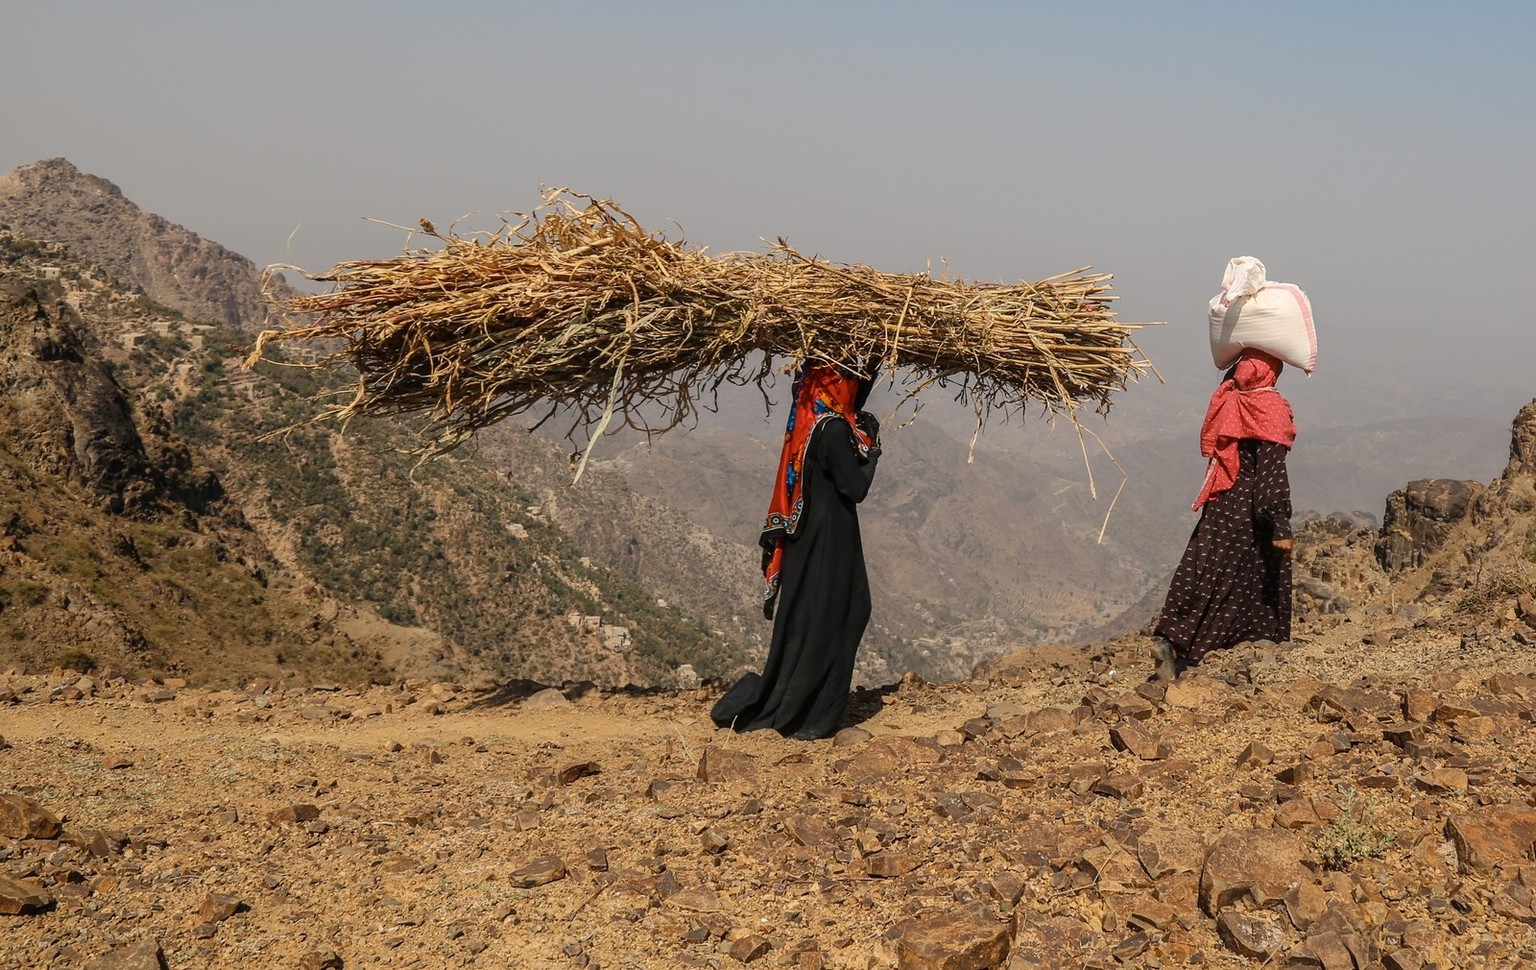 Taiz / Yemen - 02 Apr 2017: Yemeni women bring their food and drink needs across rugged mountain roads due to the Houthi militia blockade of the city of Taiz xkwx a human tragedy, a street person, agg ...